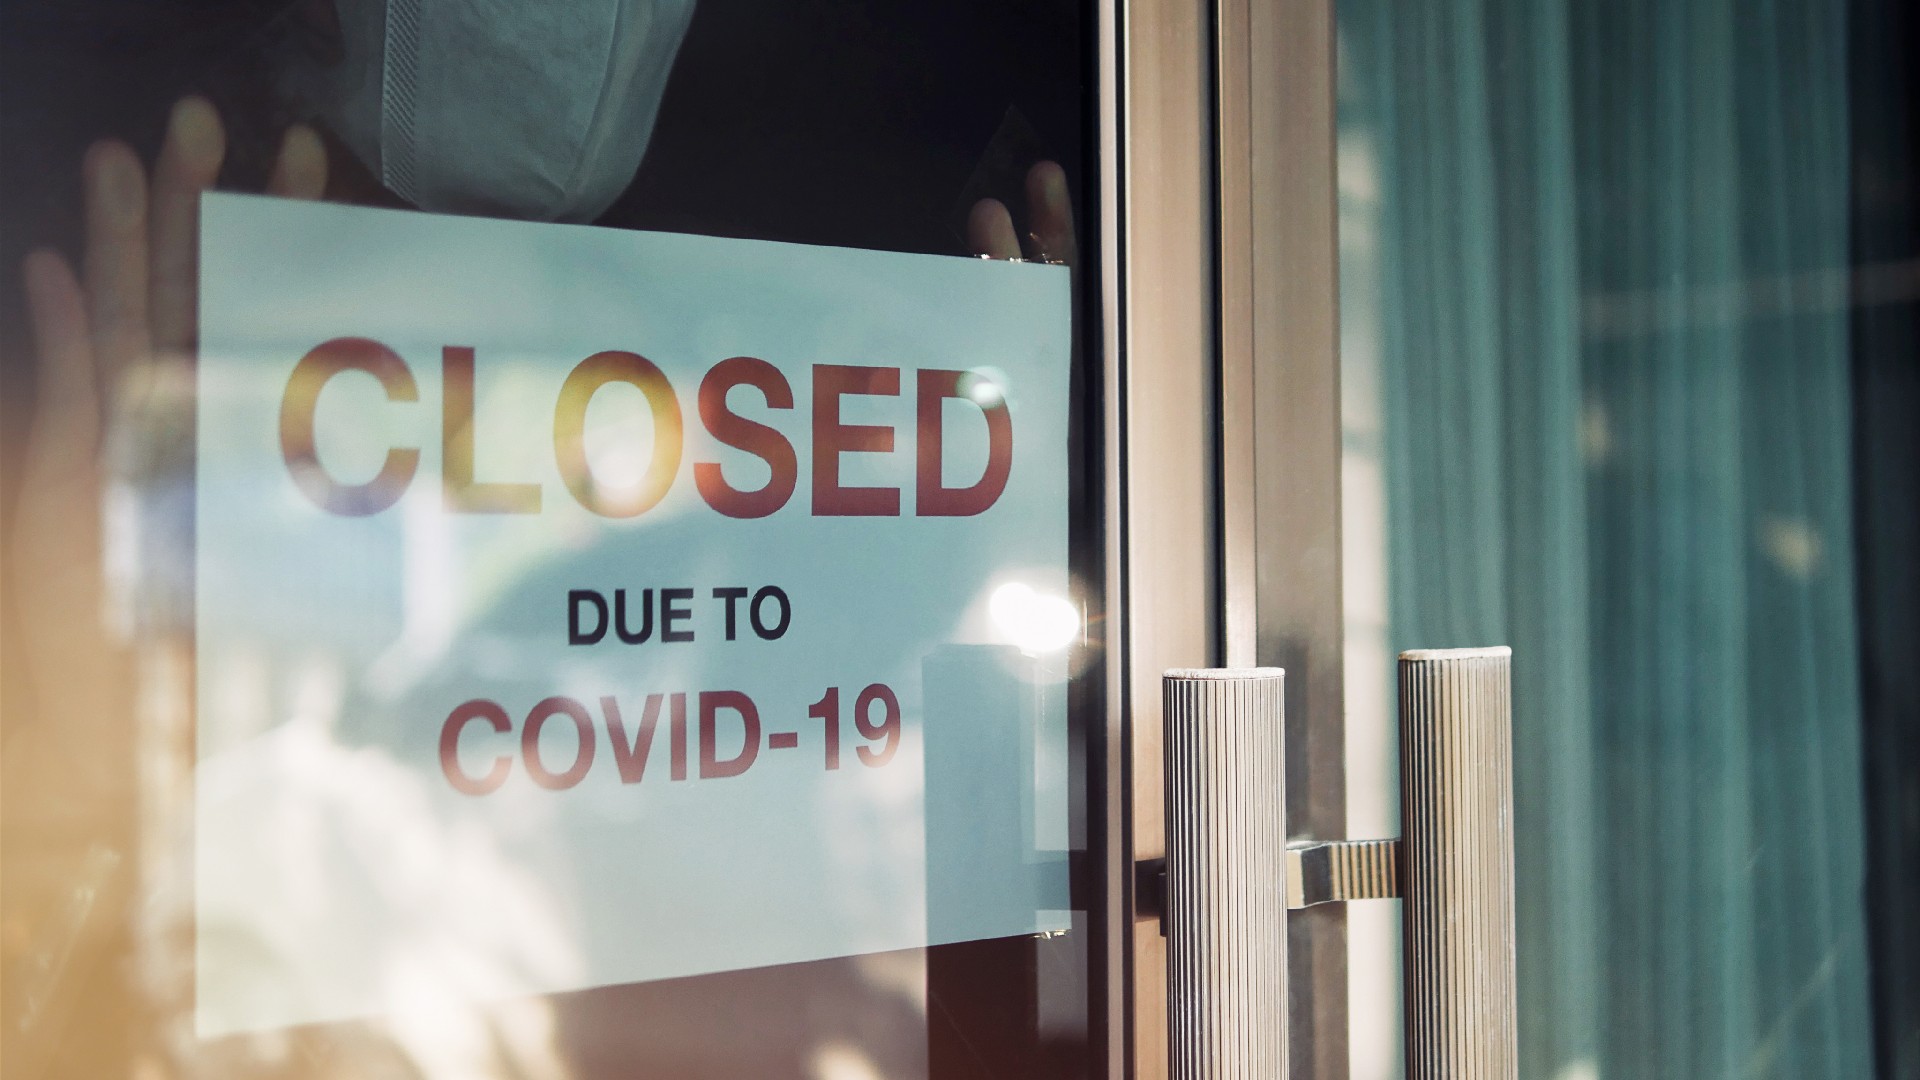 A sign on a business door says, “Closed due to COVID-19”